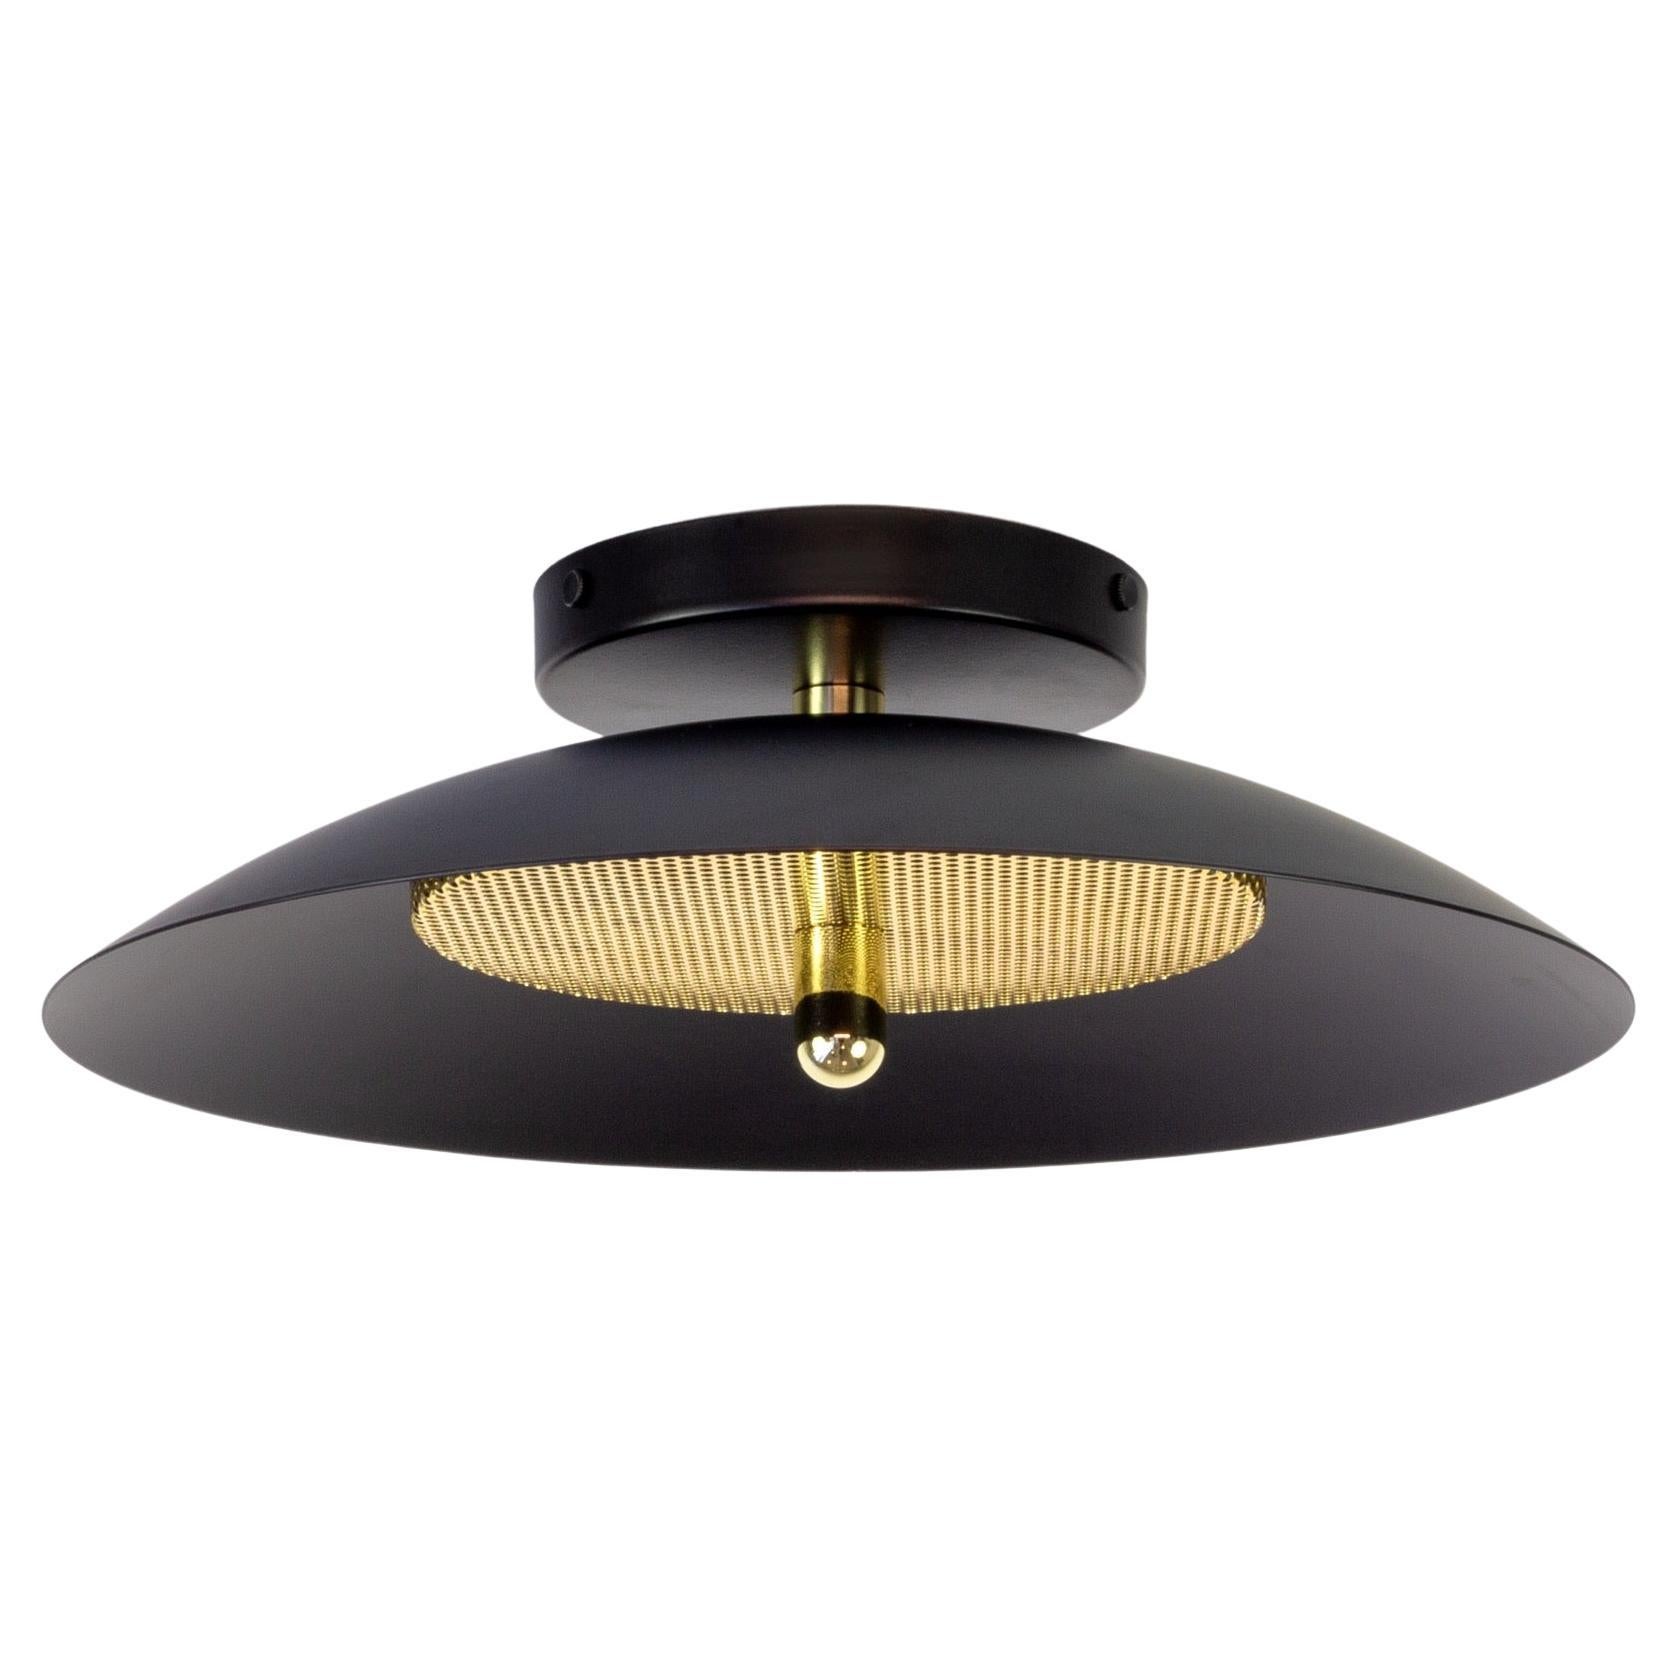 Signal Flush Mount from Souda, Black and Brass, Made to Order